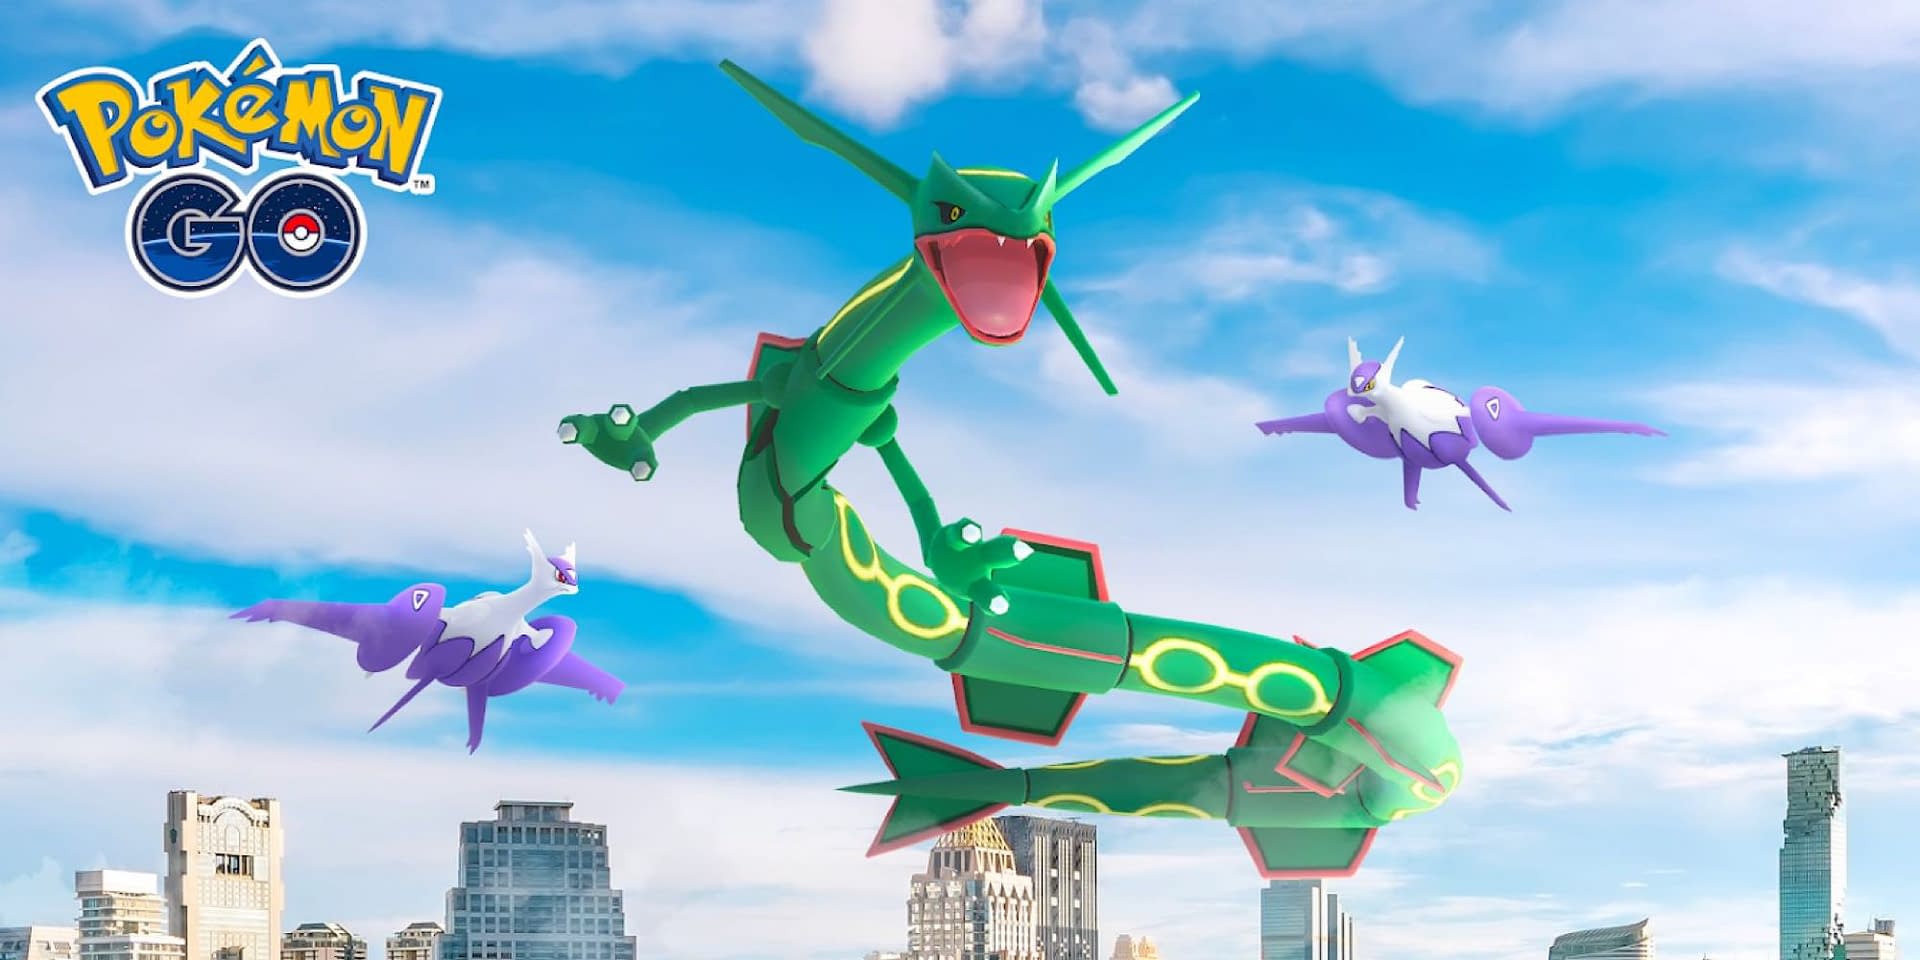 Rayquaza returns to Pokémon Go with the chance to be Shiny - Polygon